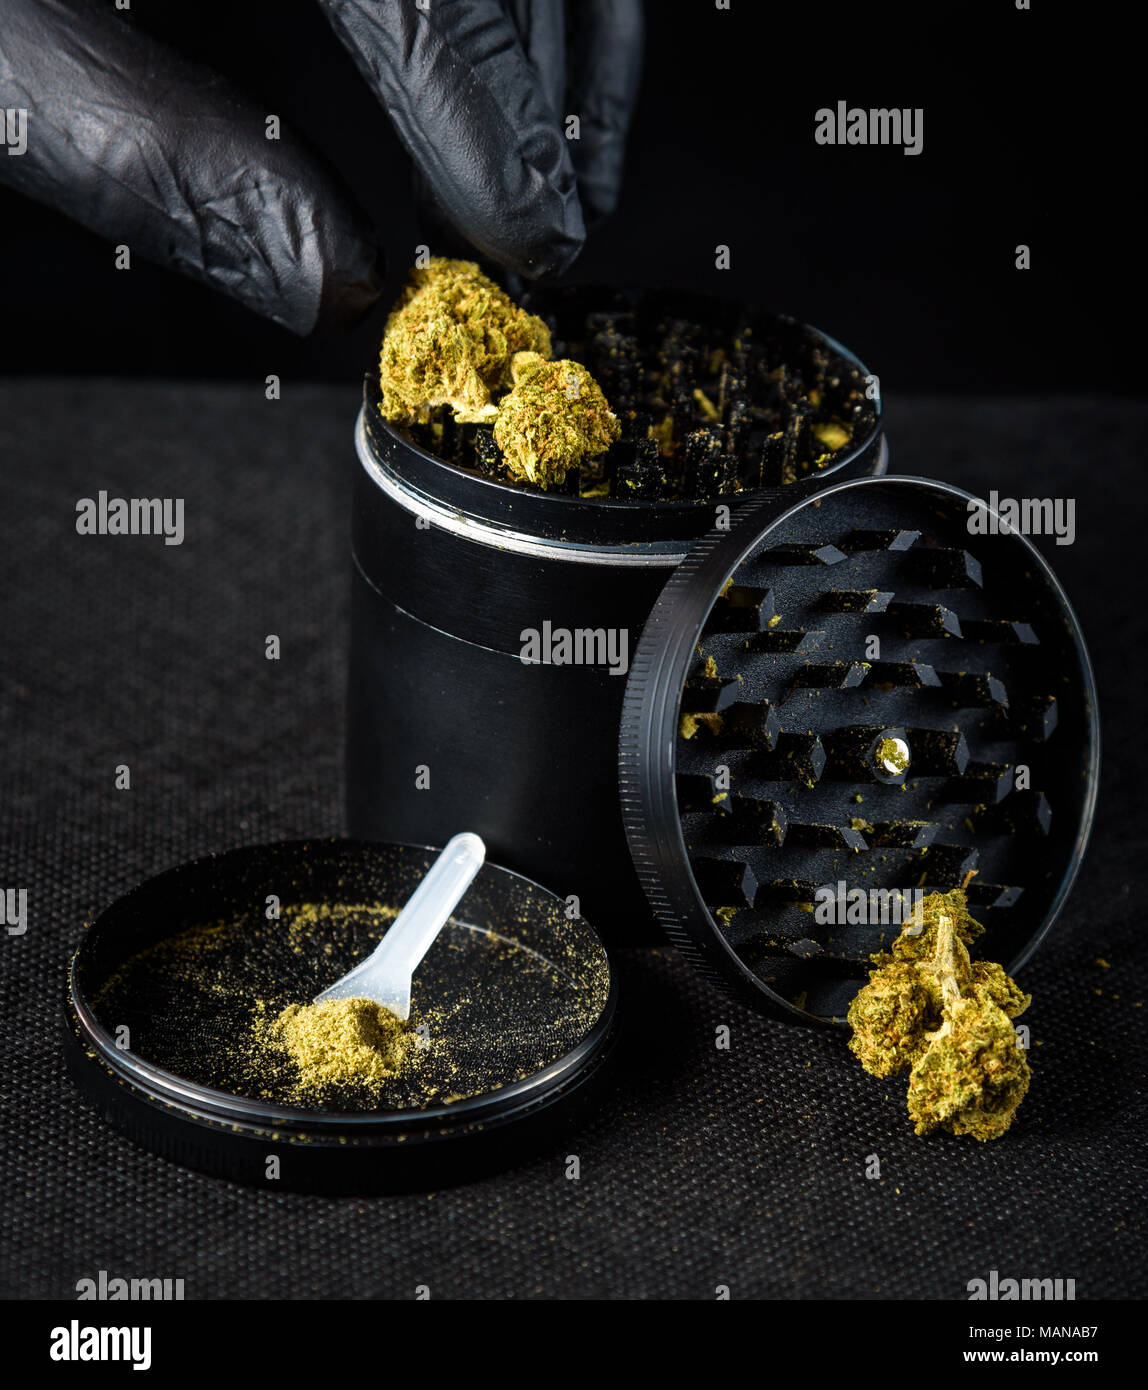 A medicinal marijuana grinder with keef and scraper. a hand with a black latex glove holding a fresh nug. Black background Stock Photo